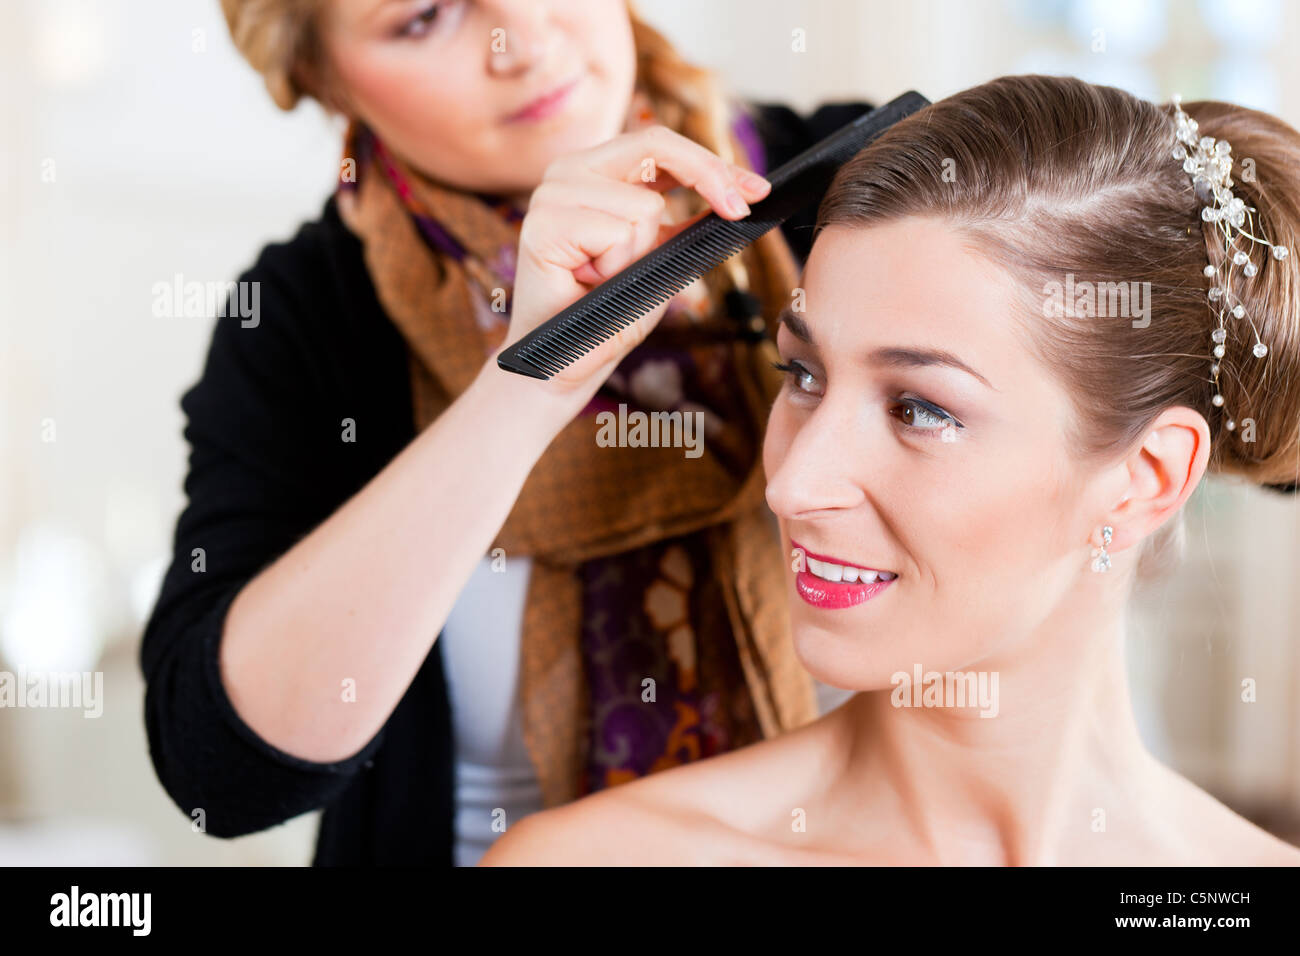 Stylist pinning up a bride's hairstyle before the wedding Stock Photo